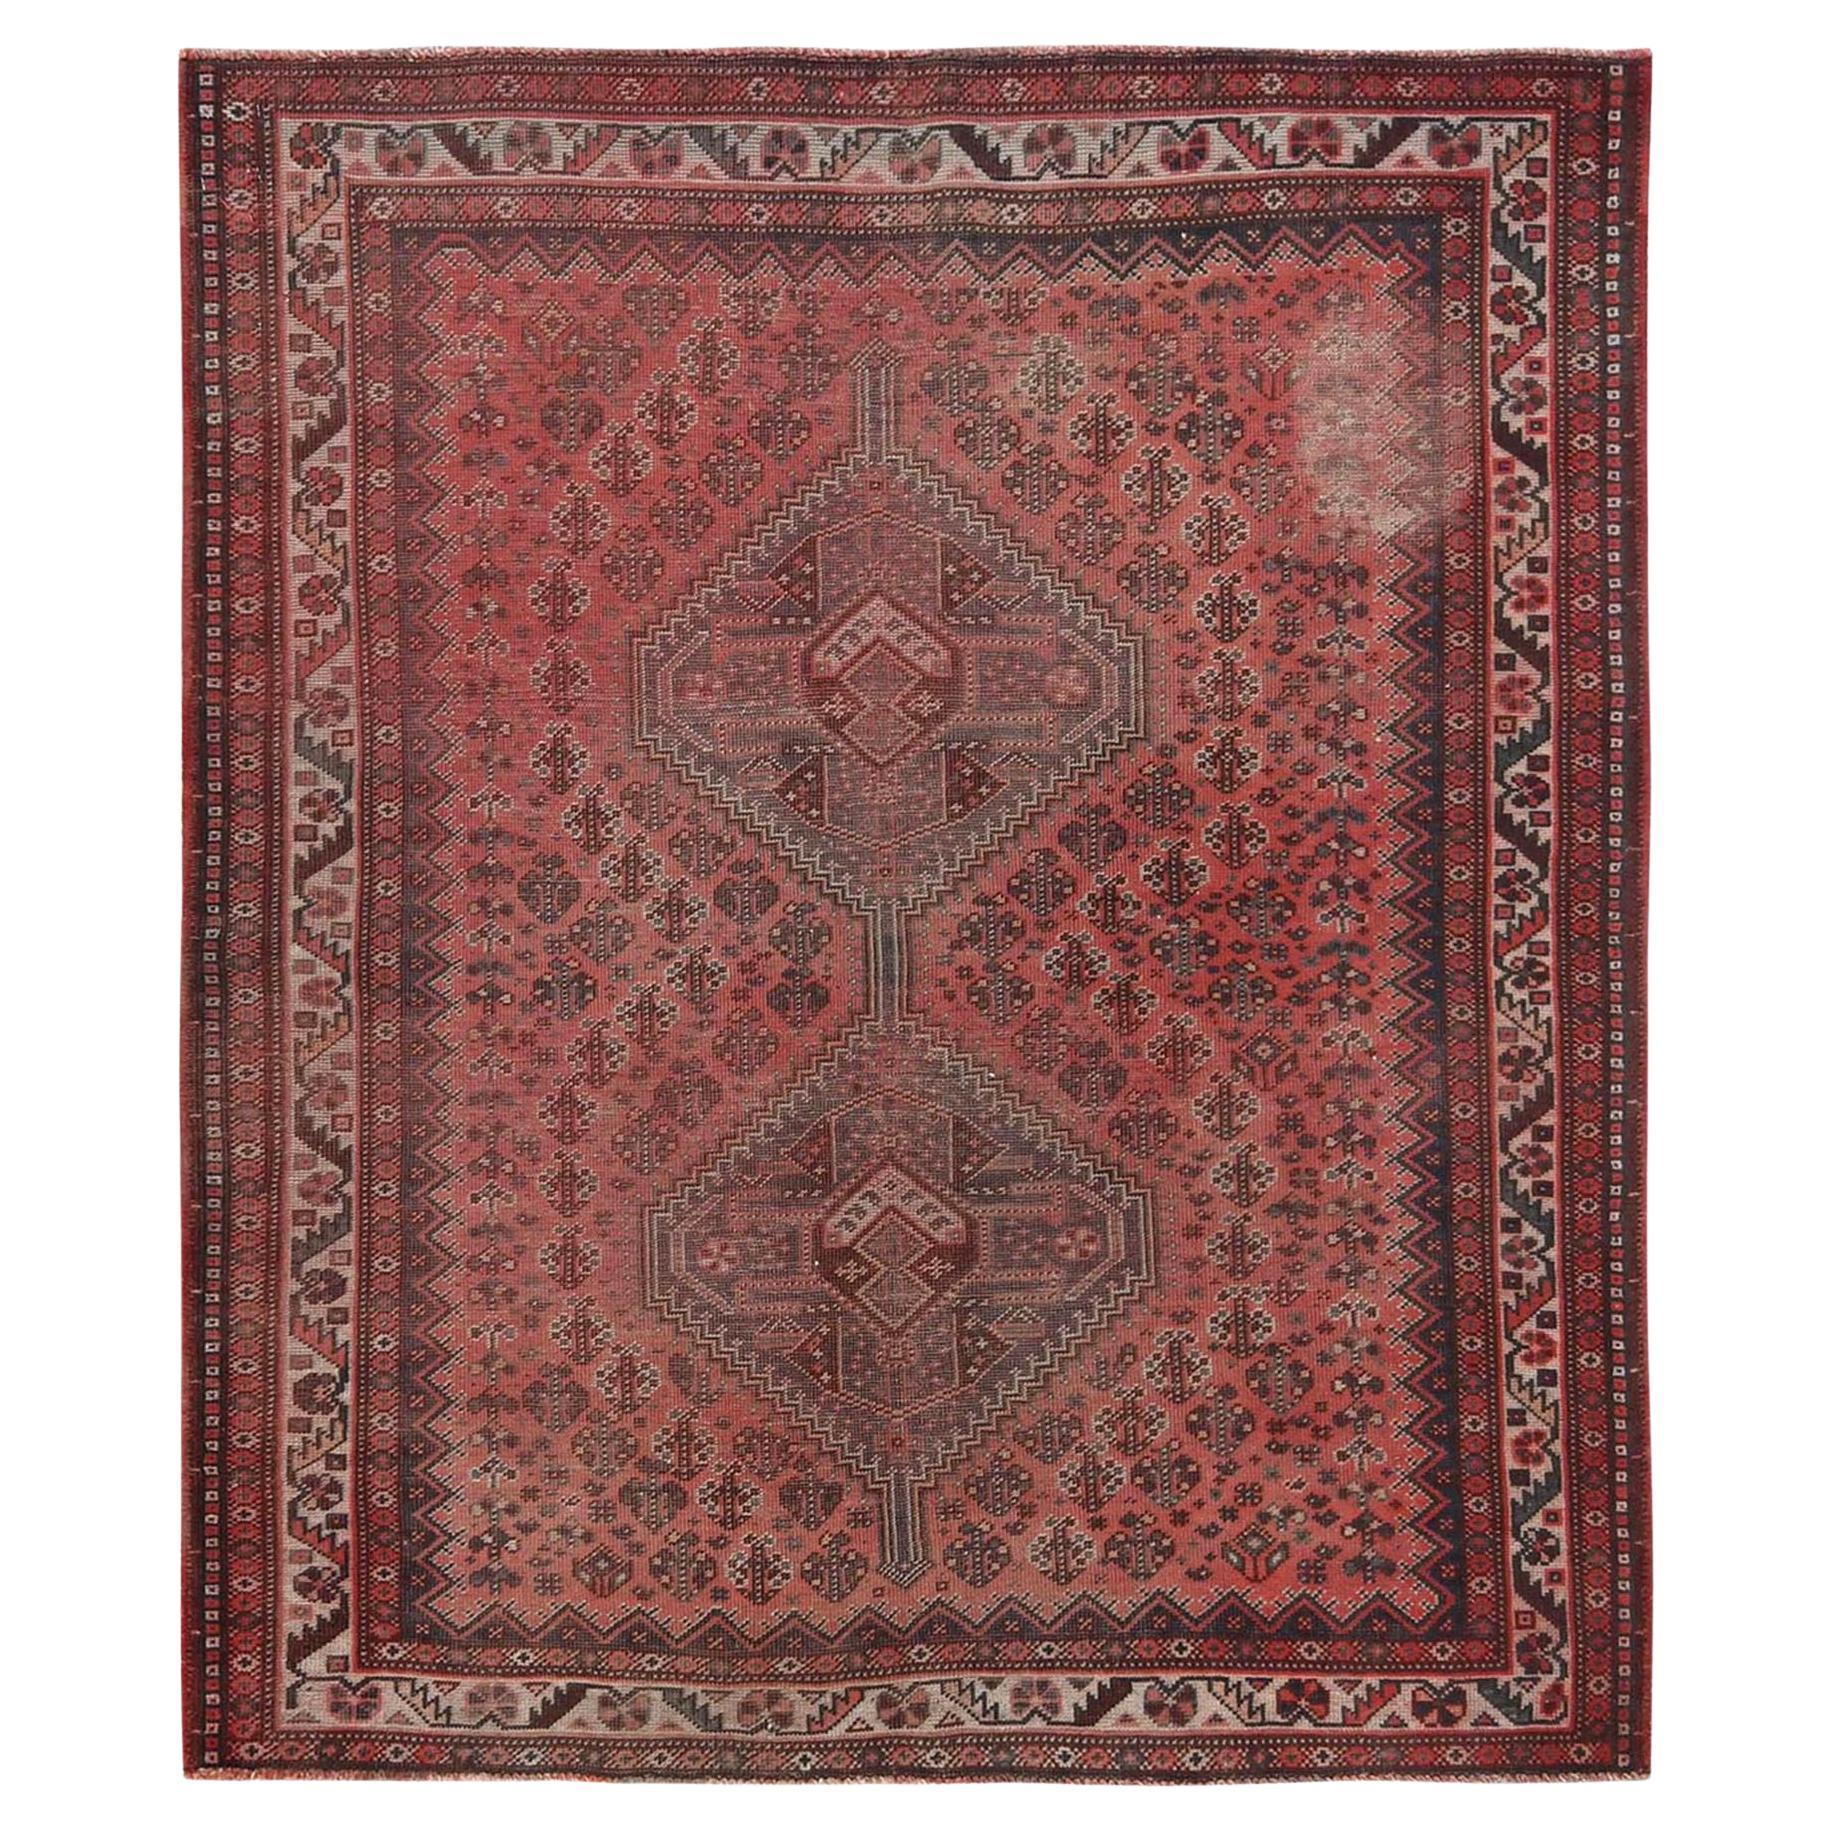 Tomato Red, Distressed Look Vintage Persian Shiraz, Hand Knotted Worn Wool Rug